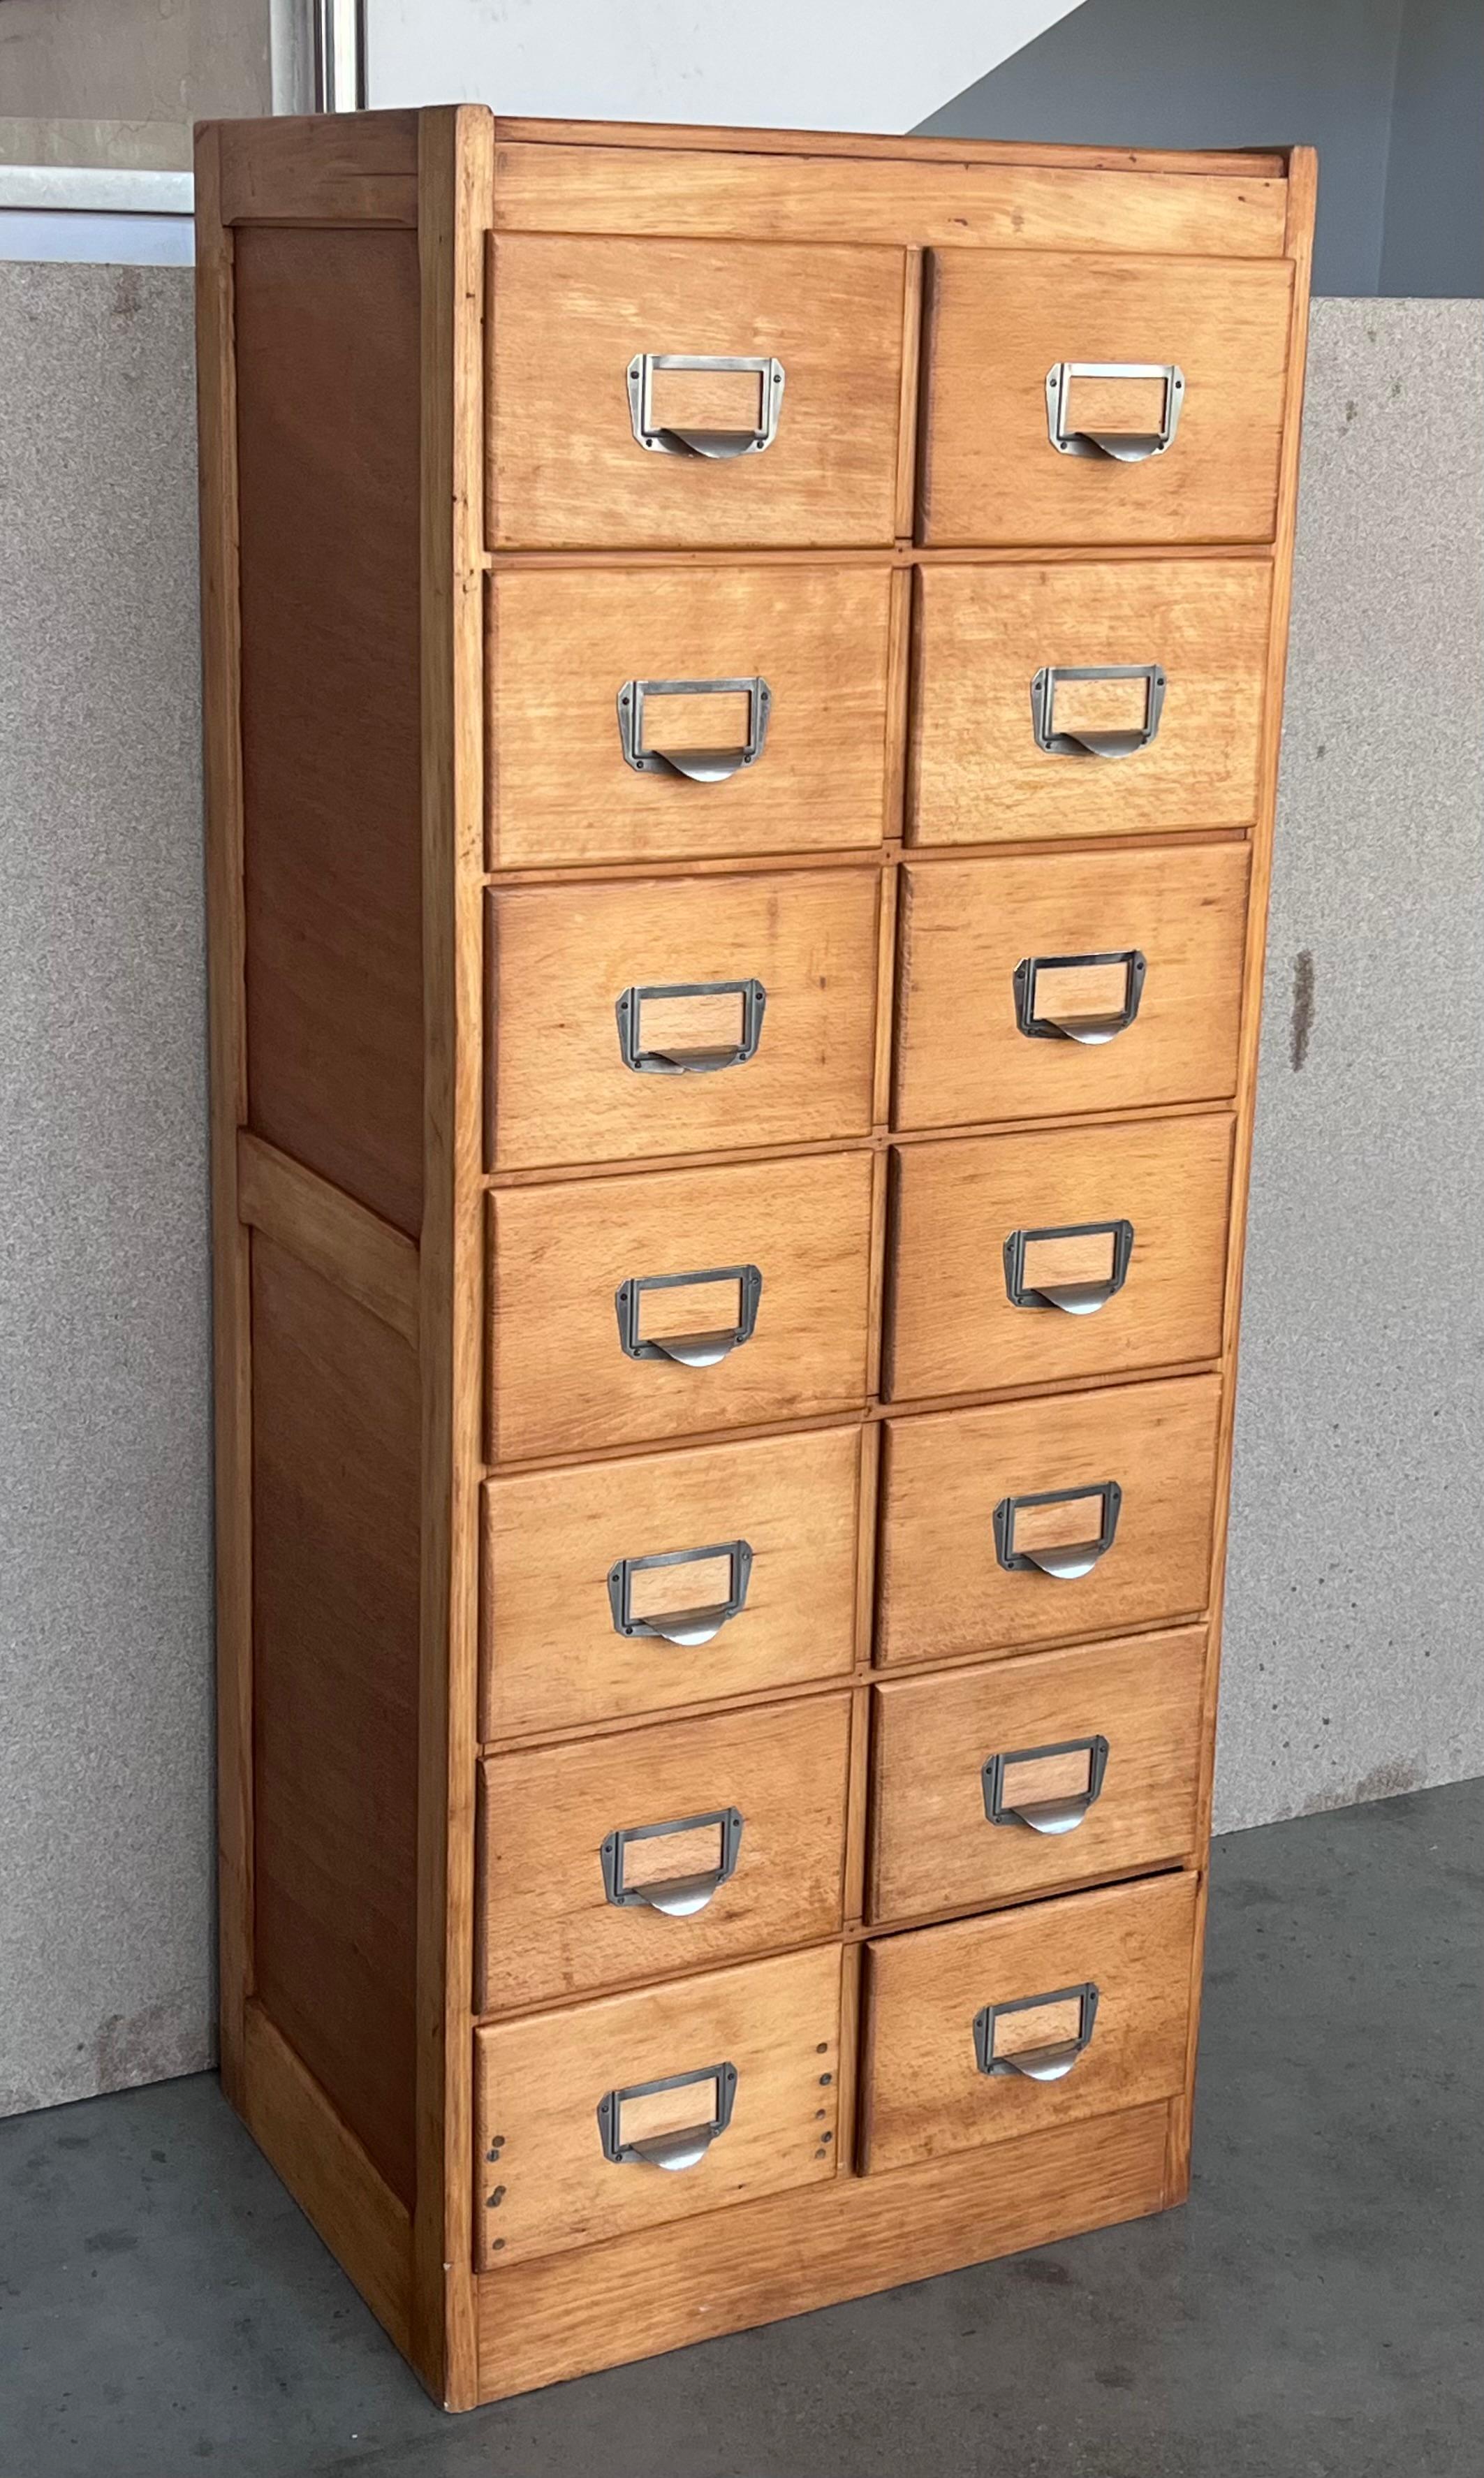 Large bank of French Art Deco filing drawers, circa 1930s. - solid oak drawers and frame - oak ply panels on the sides - geometric cup handles.